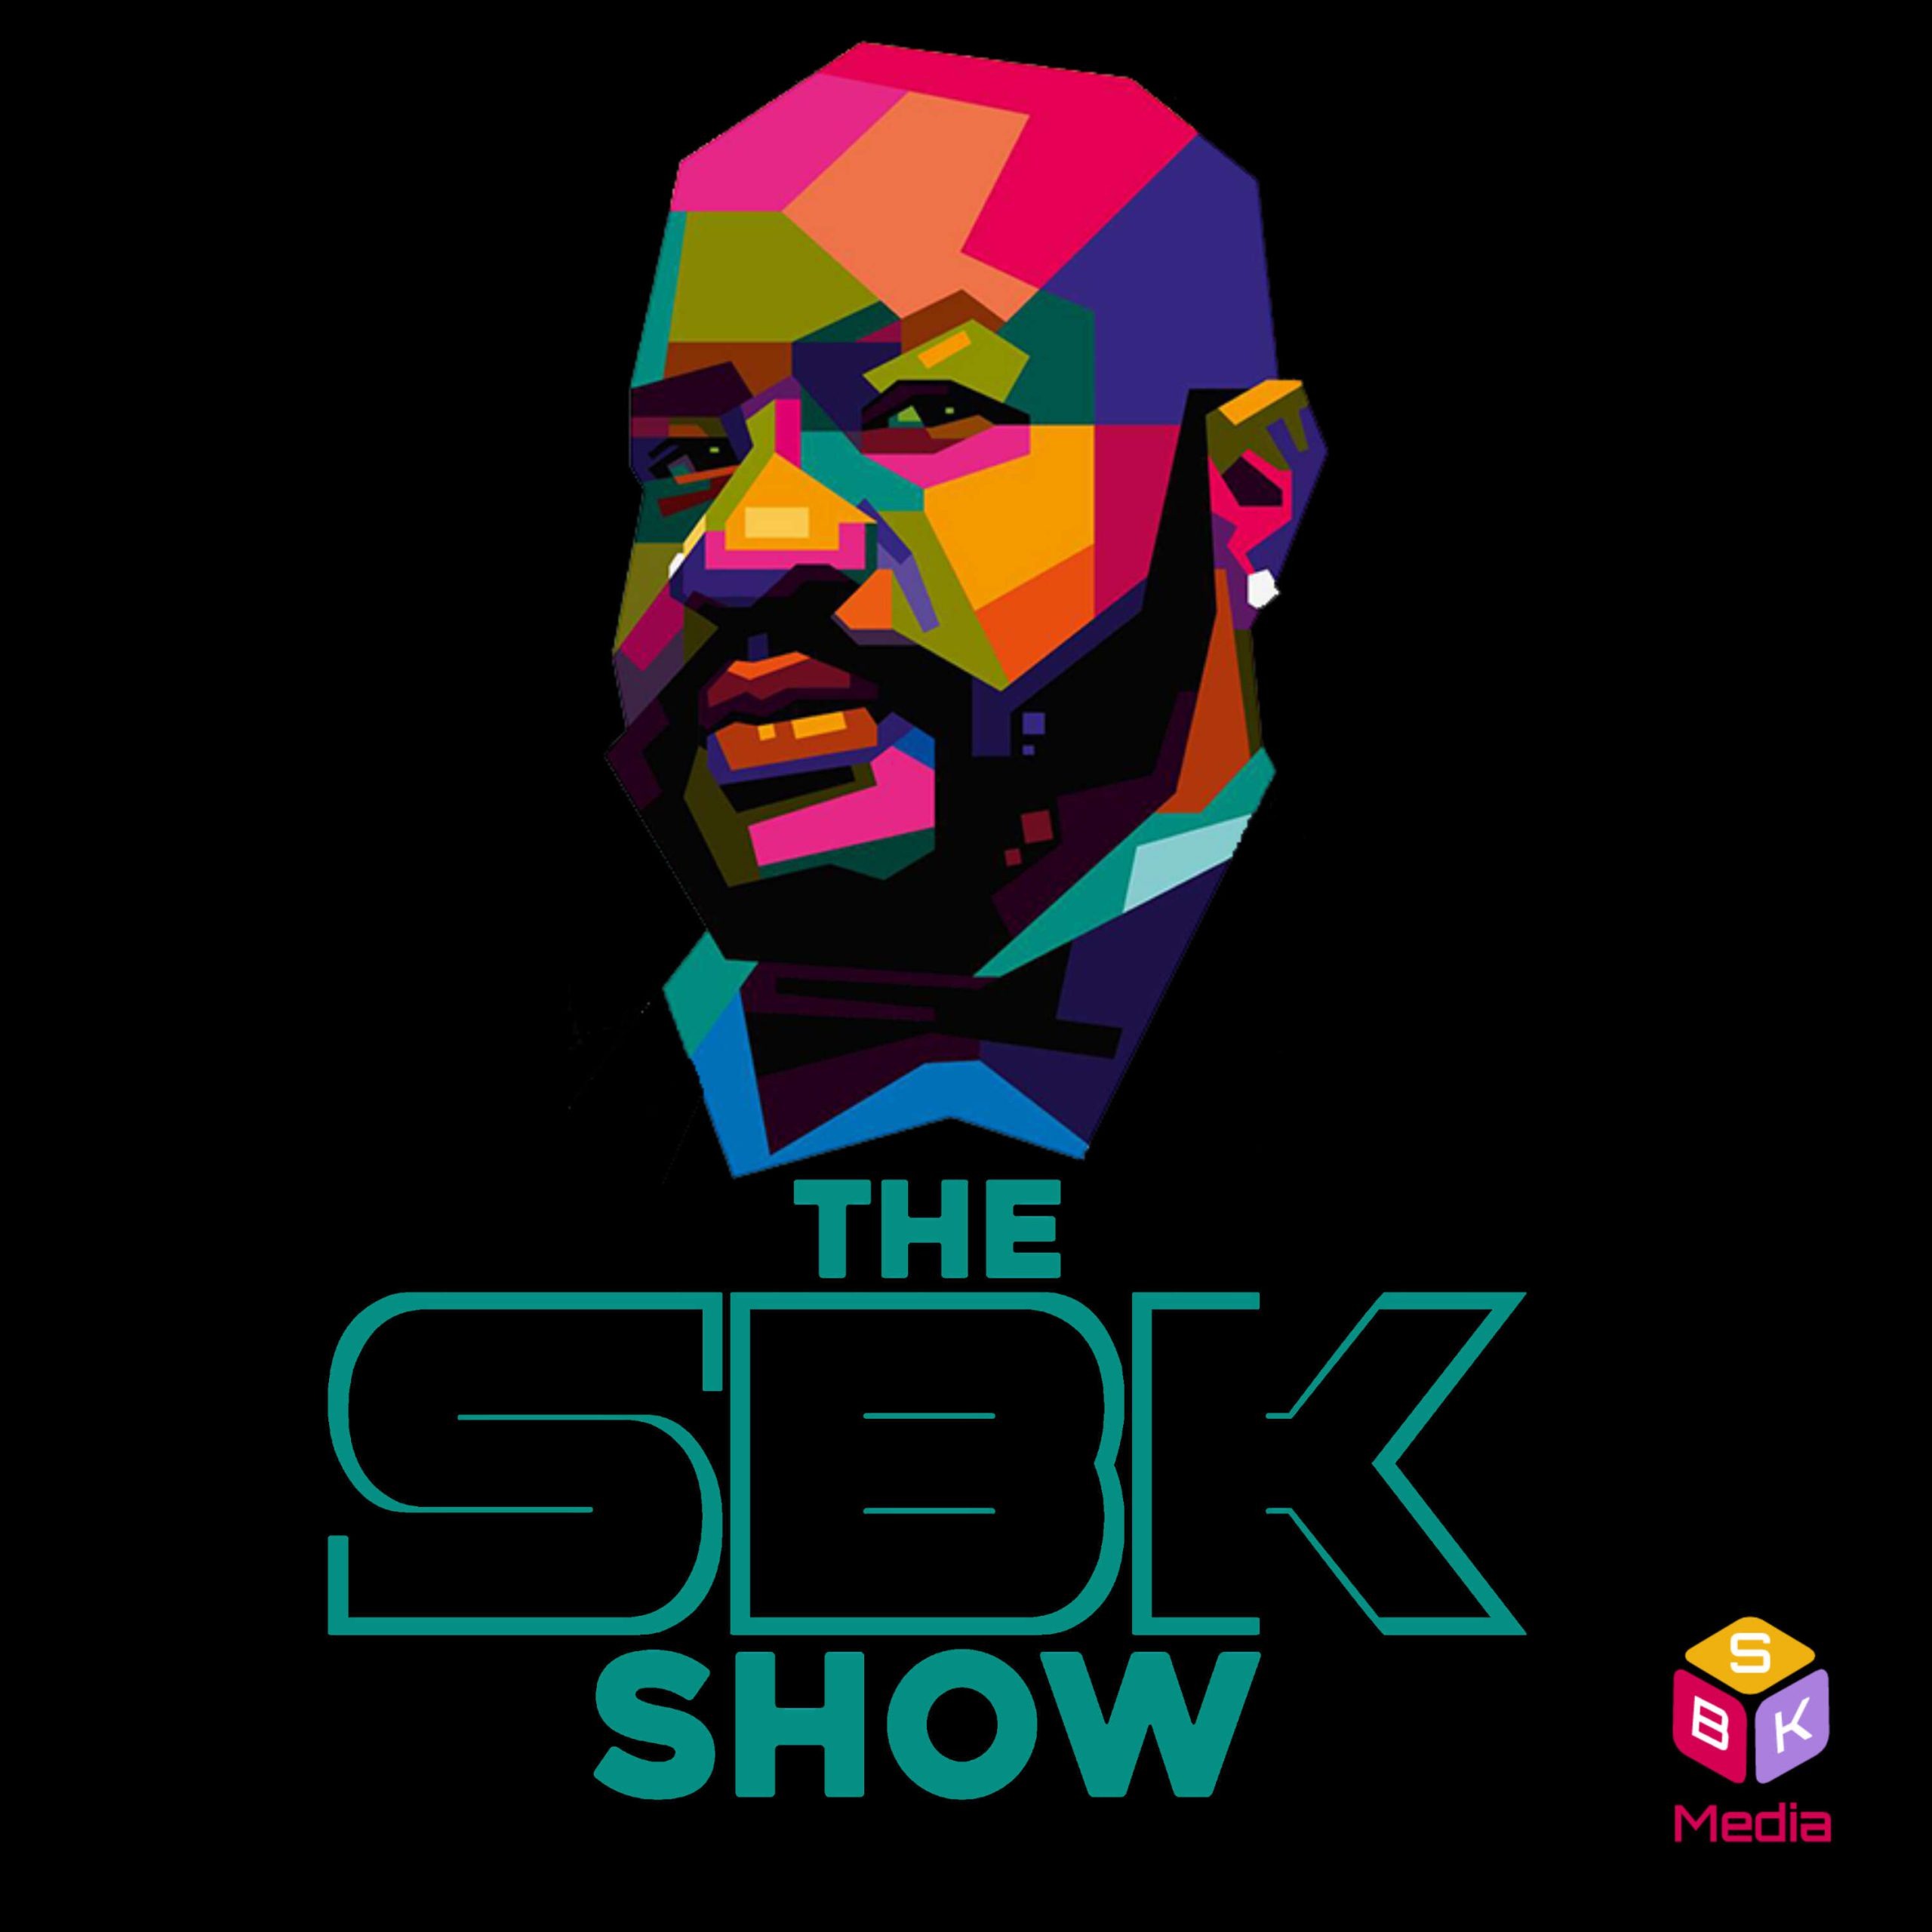 The SBK Show